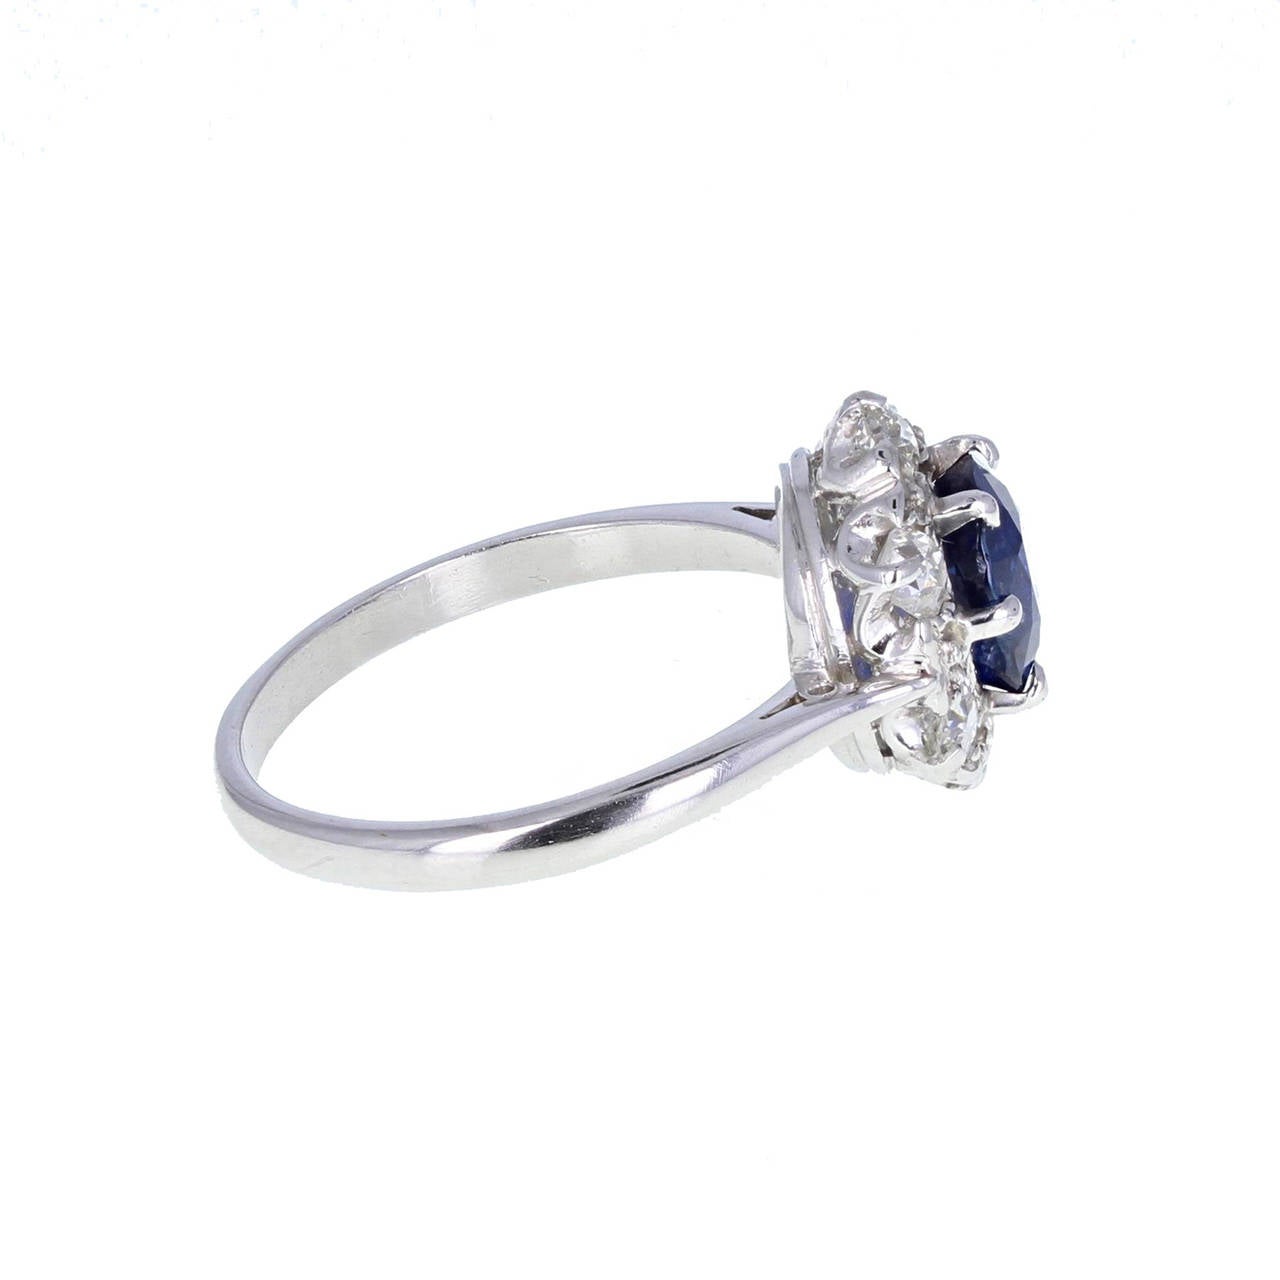 A fantastic quality and exceptional value antique sapphire and diamond cluster ring. Mounted in platinum the central, cushion-cut sapphire exhibits deep, royal blue. Surrounded by old-cut diamonds in a hexagonal shaped setting. Tapering shoulders